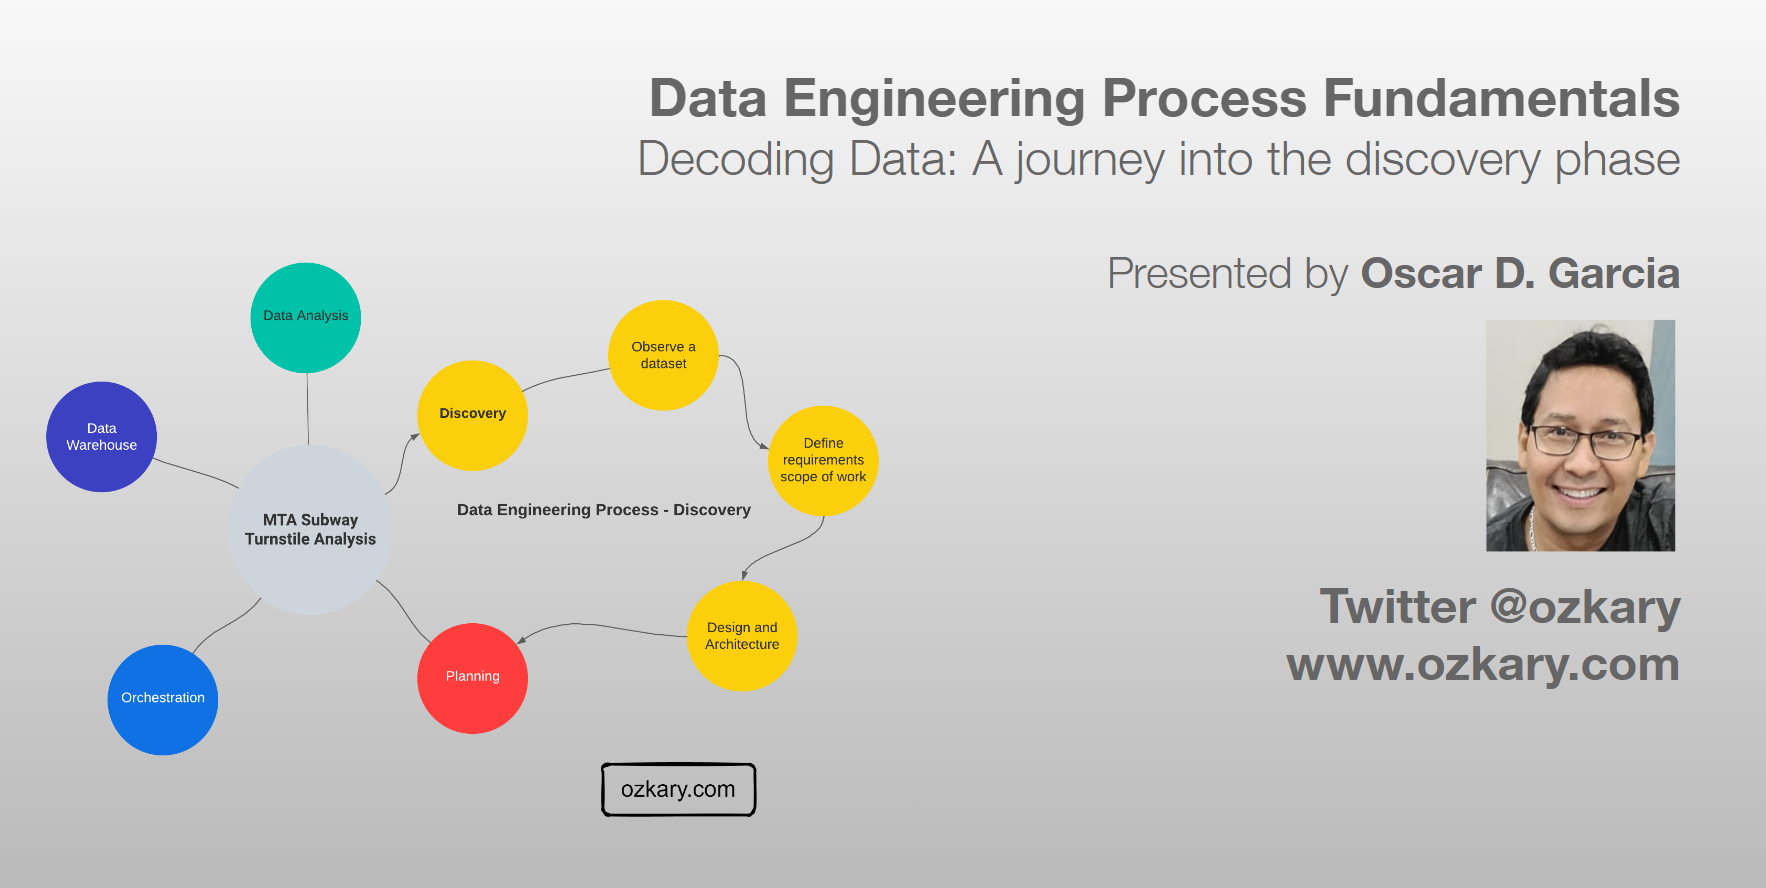 Data Engineering Process Fundamentals - Discovery Phase